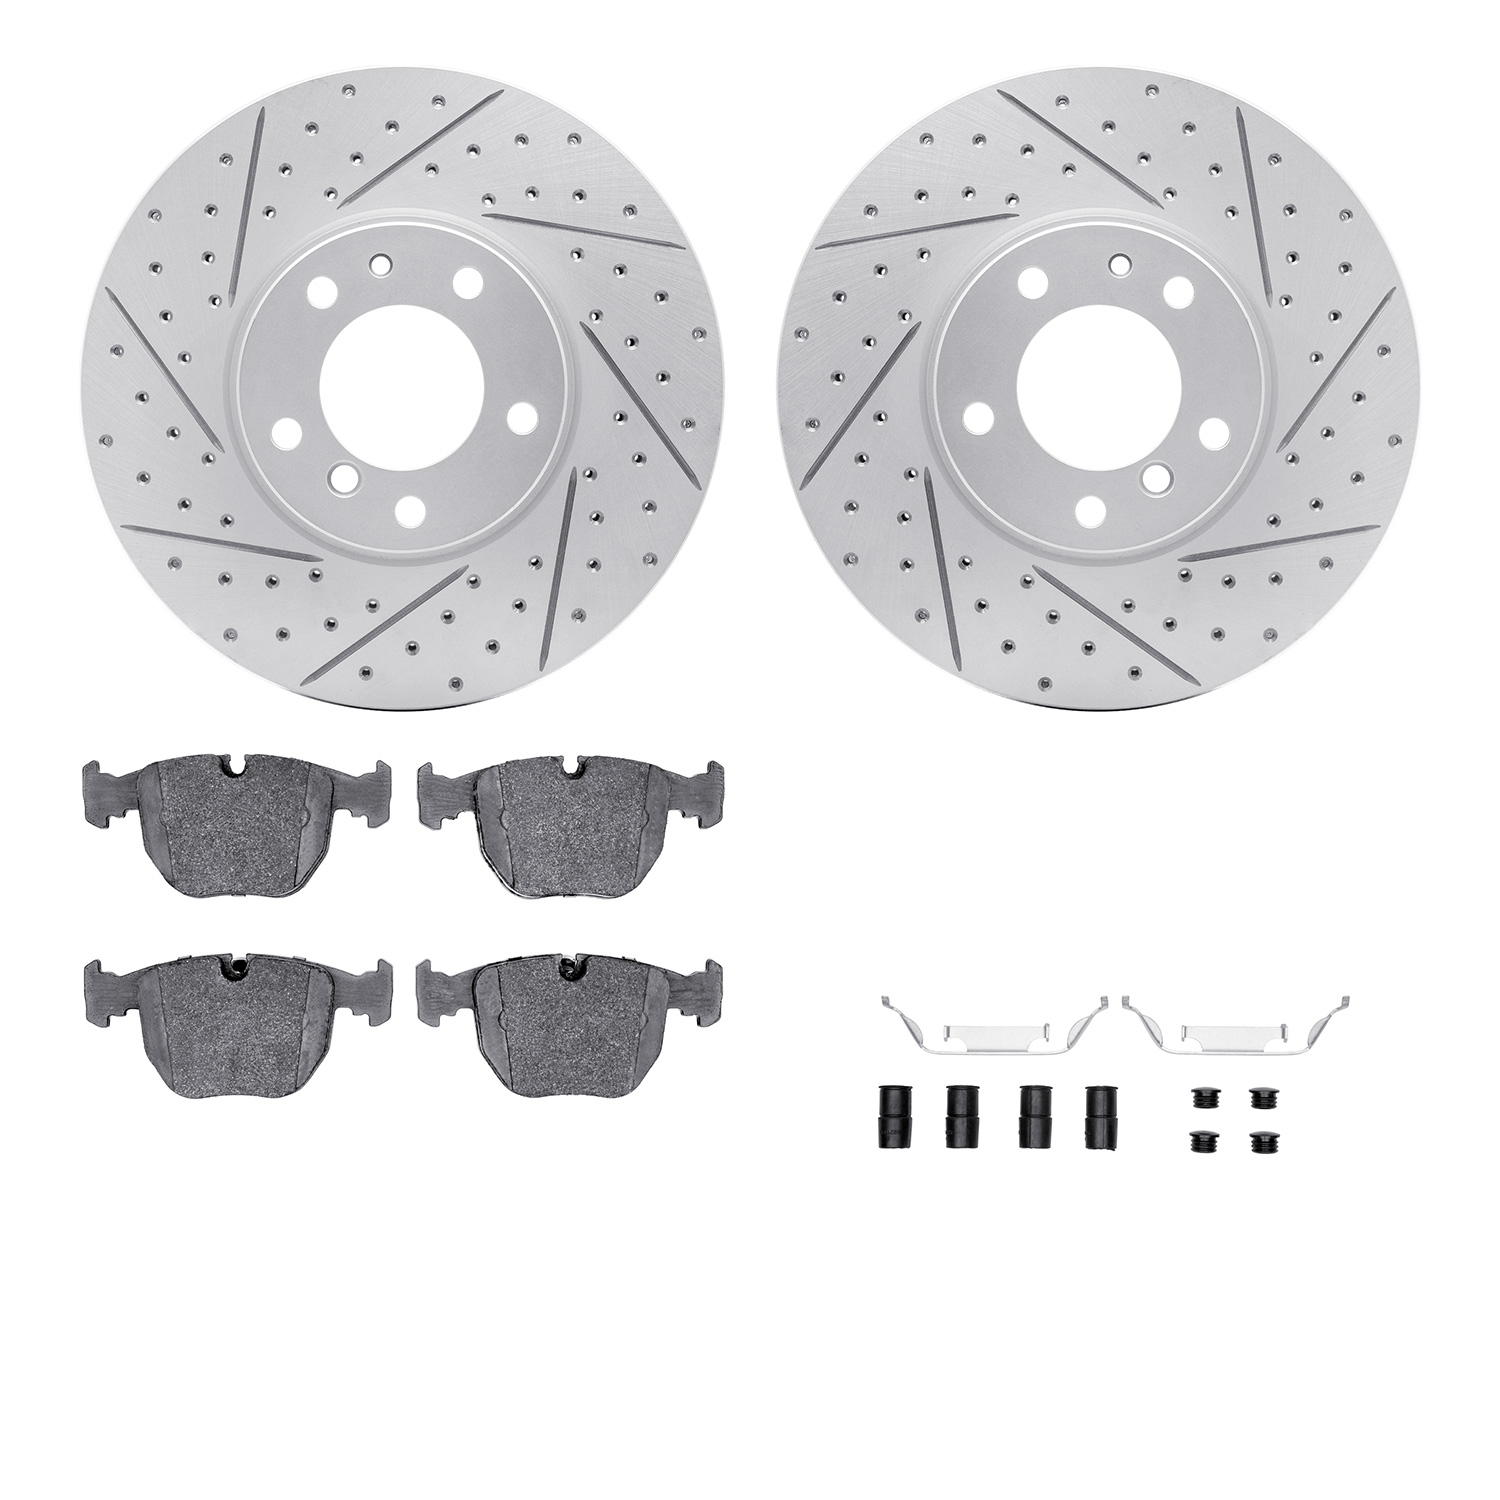 2512-31010 Geoperformance Drilled/Slotted Rotors w/5000 Advanced Brake Pads Kit & Hardware, 1995-2001 BMW, Position: Front